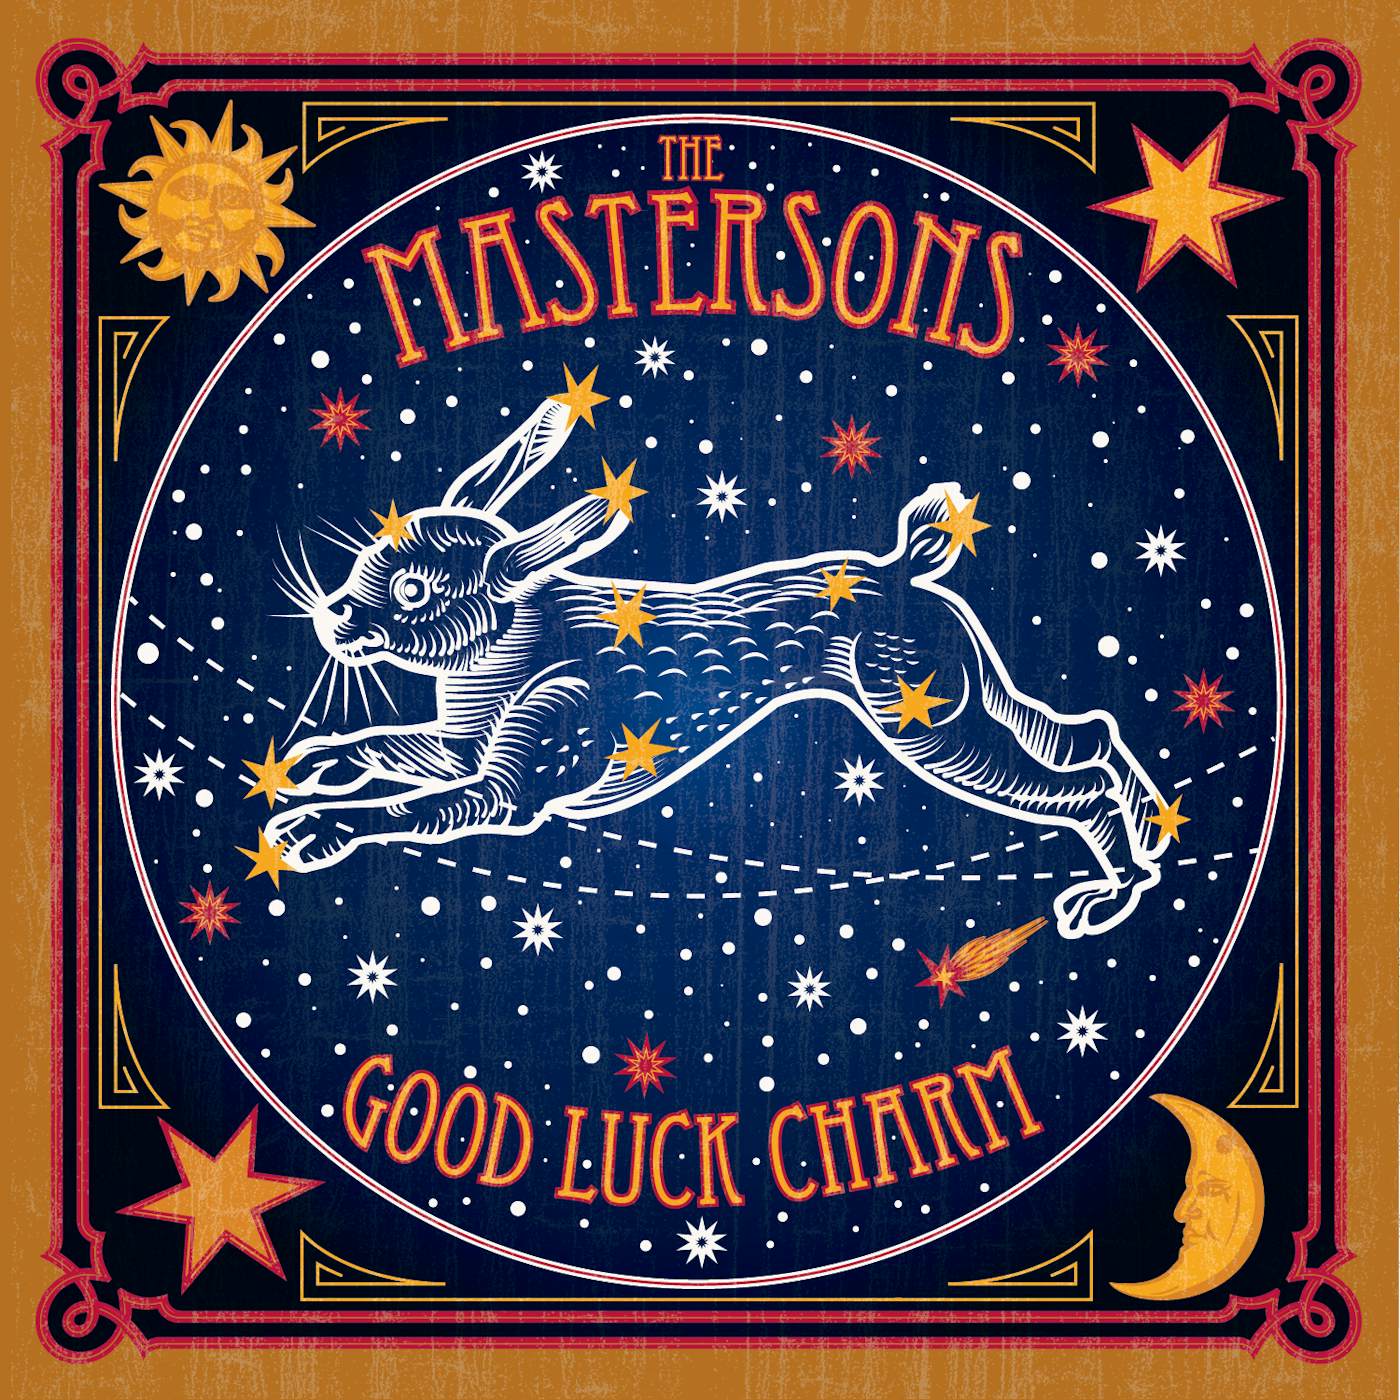 The Mastersons Good Luck Charm Vinyl Record